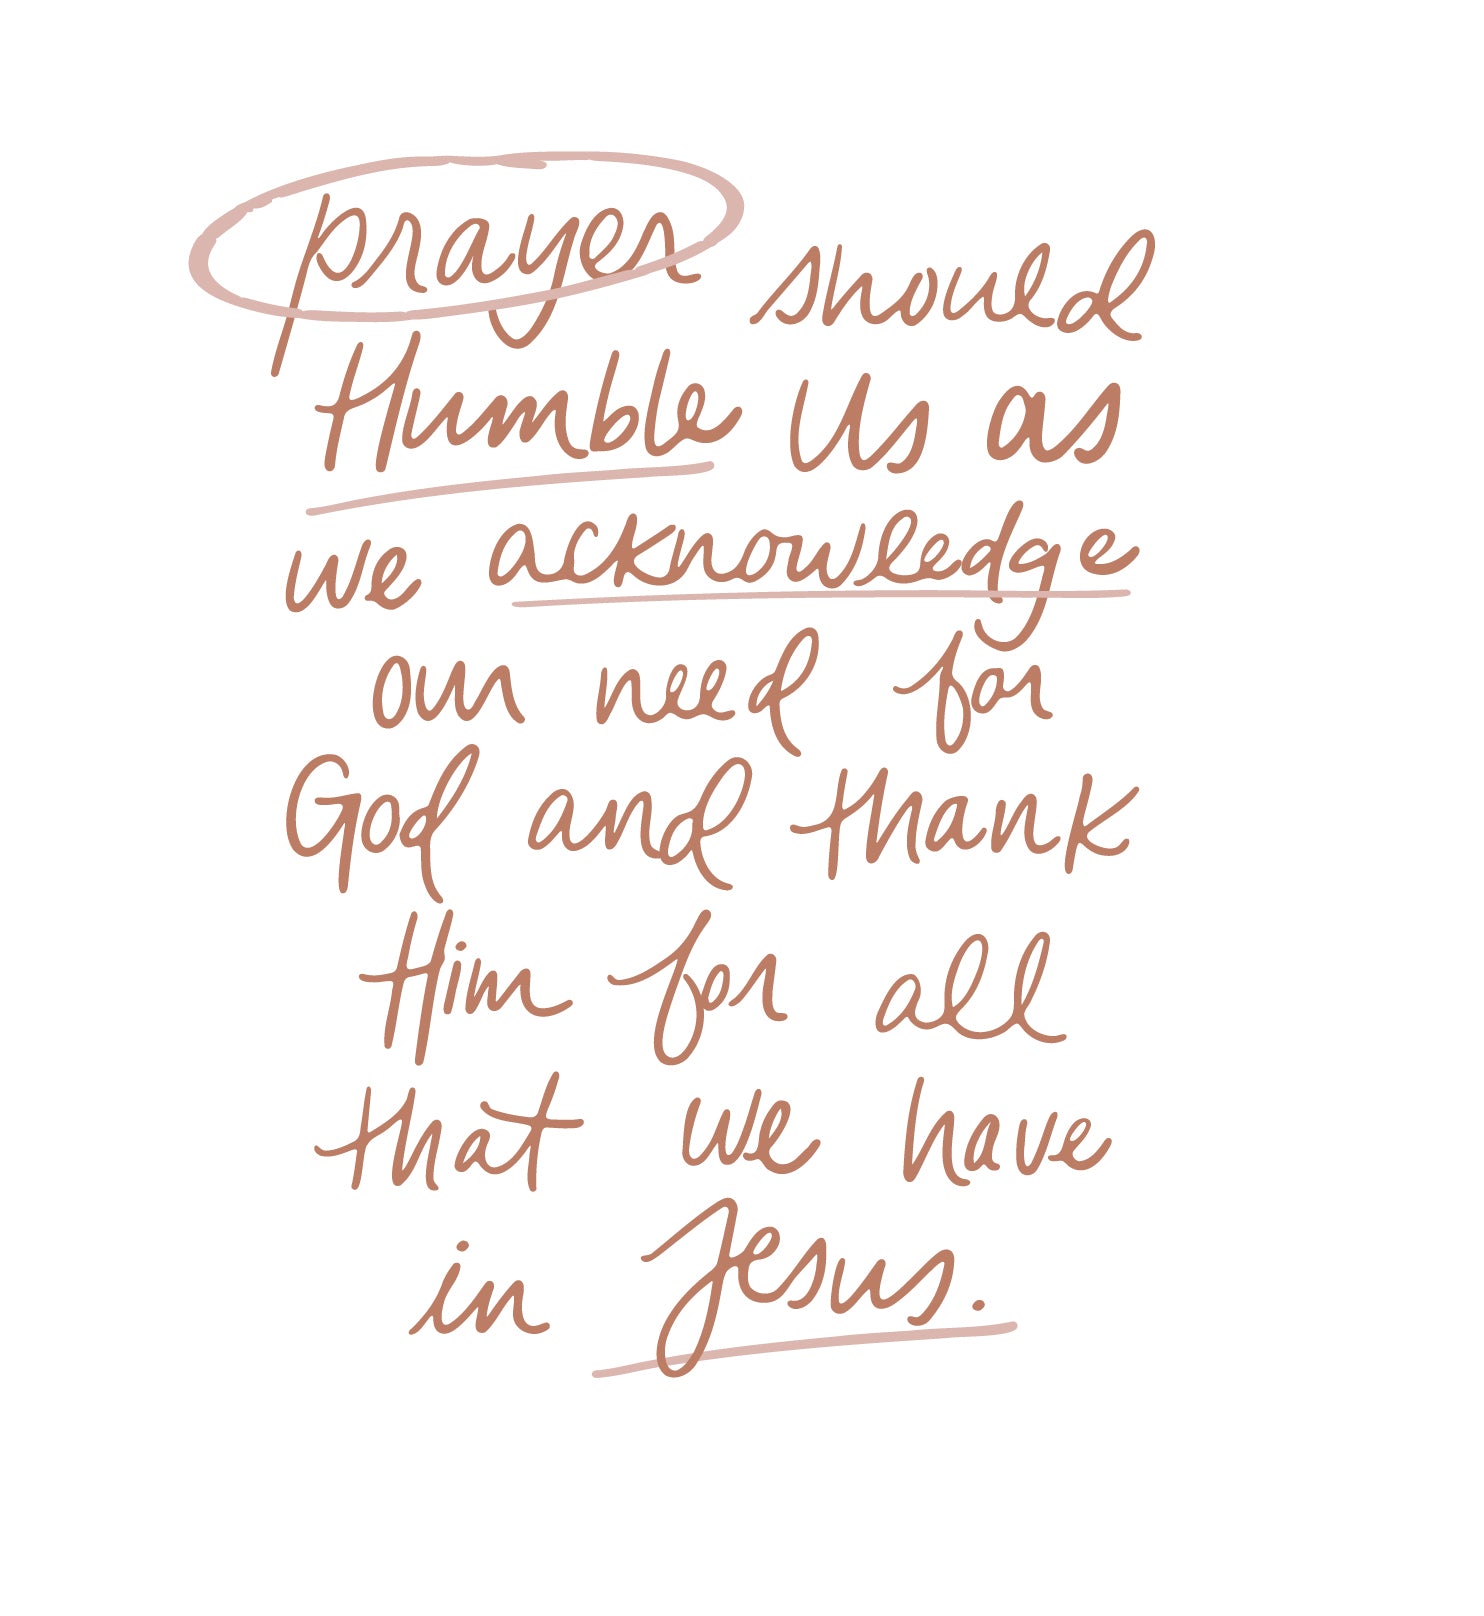 Prayer should humble us as we thank God for all we have in Jesus | TDGC